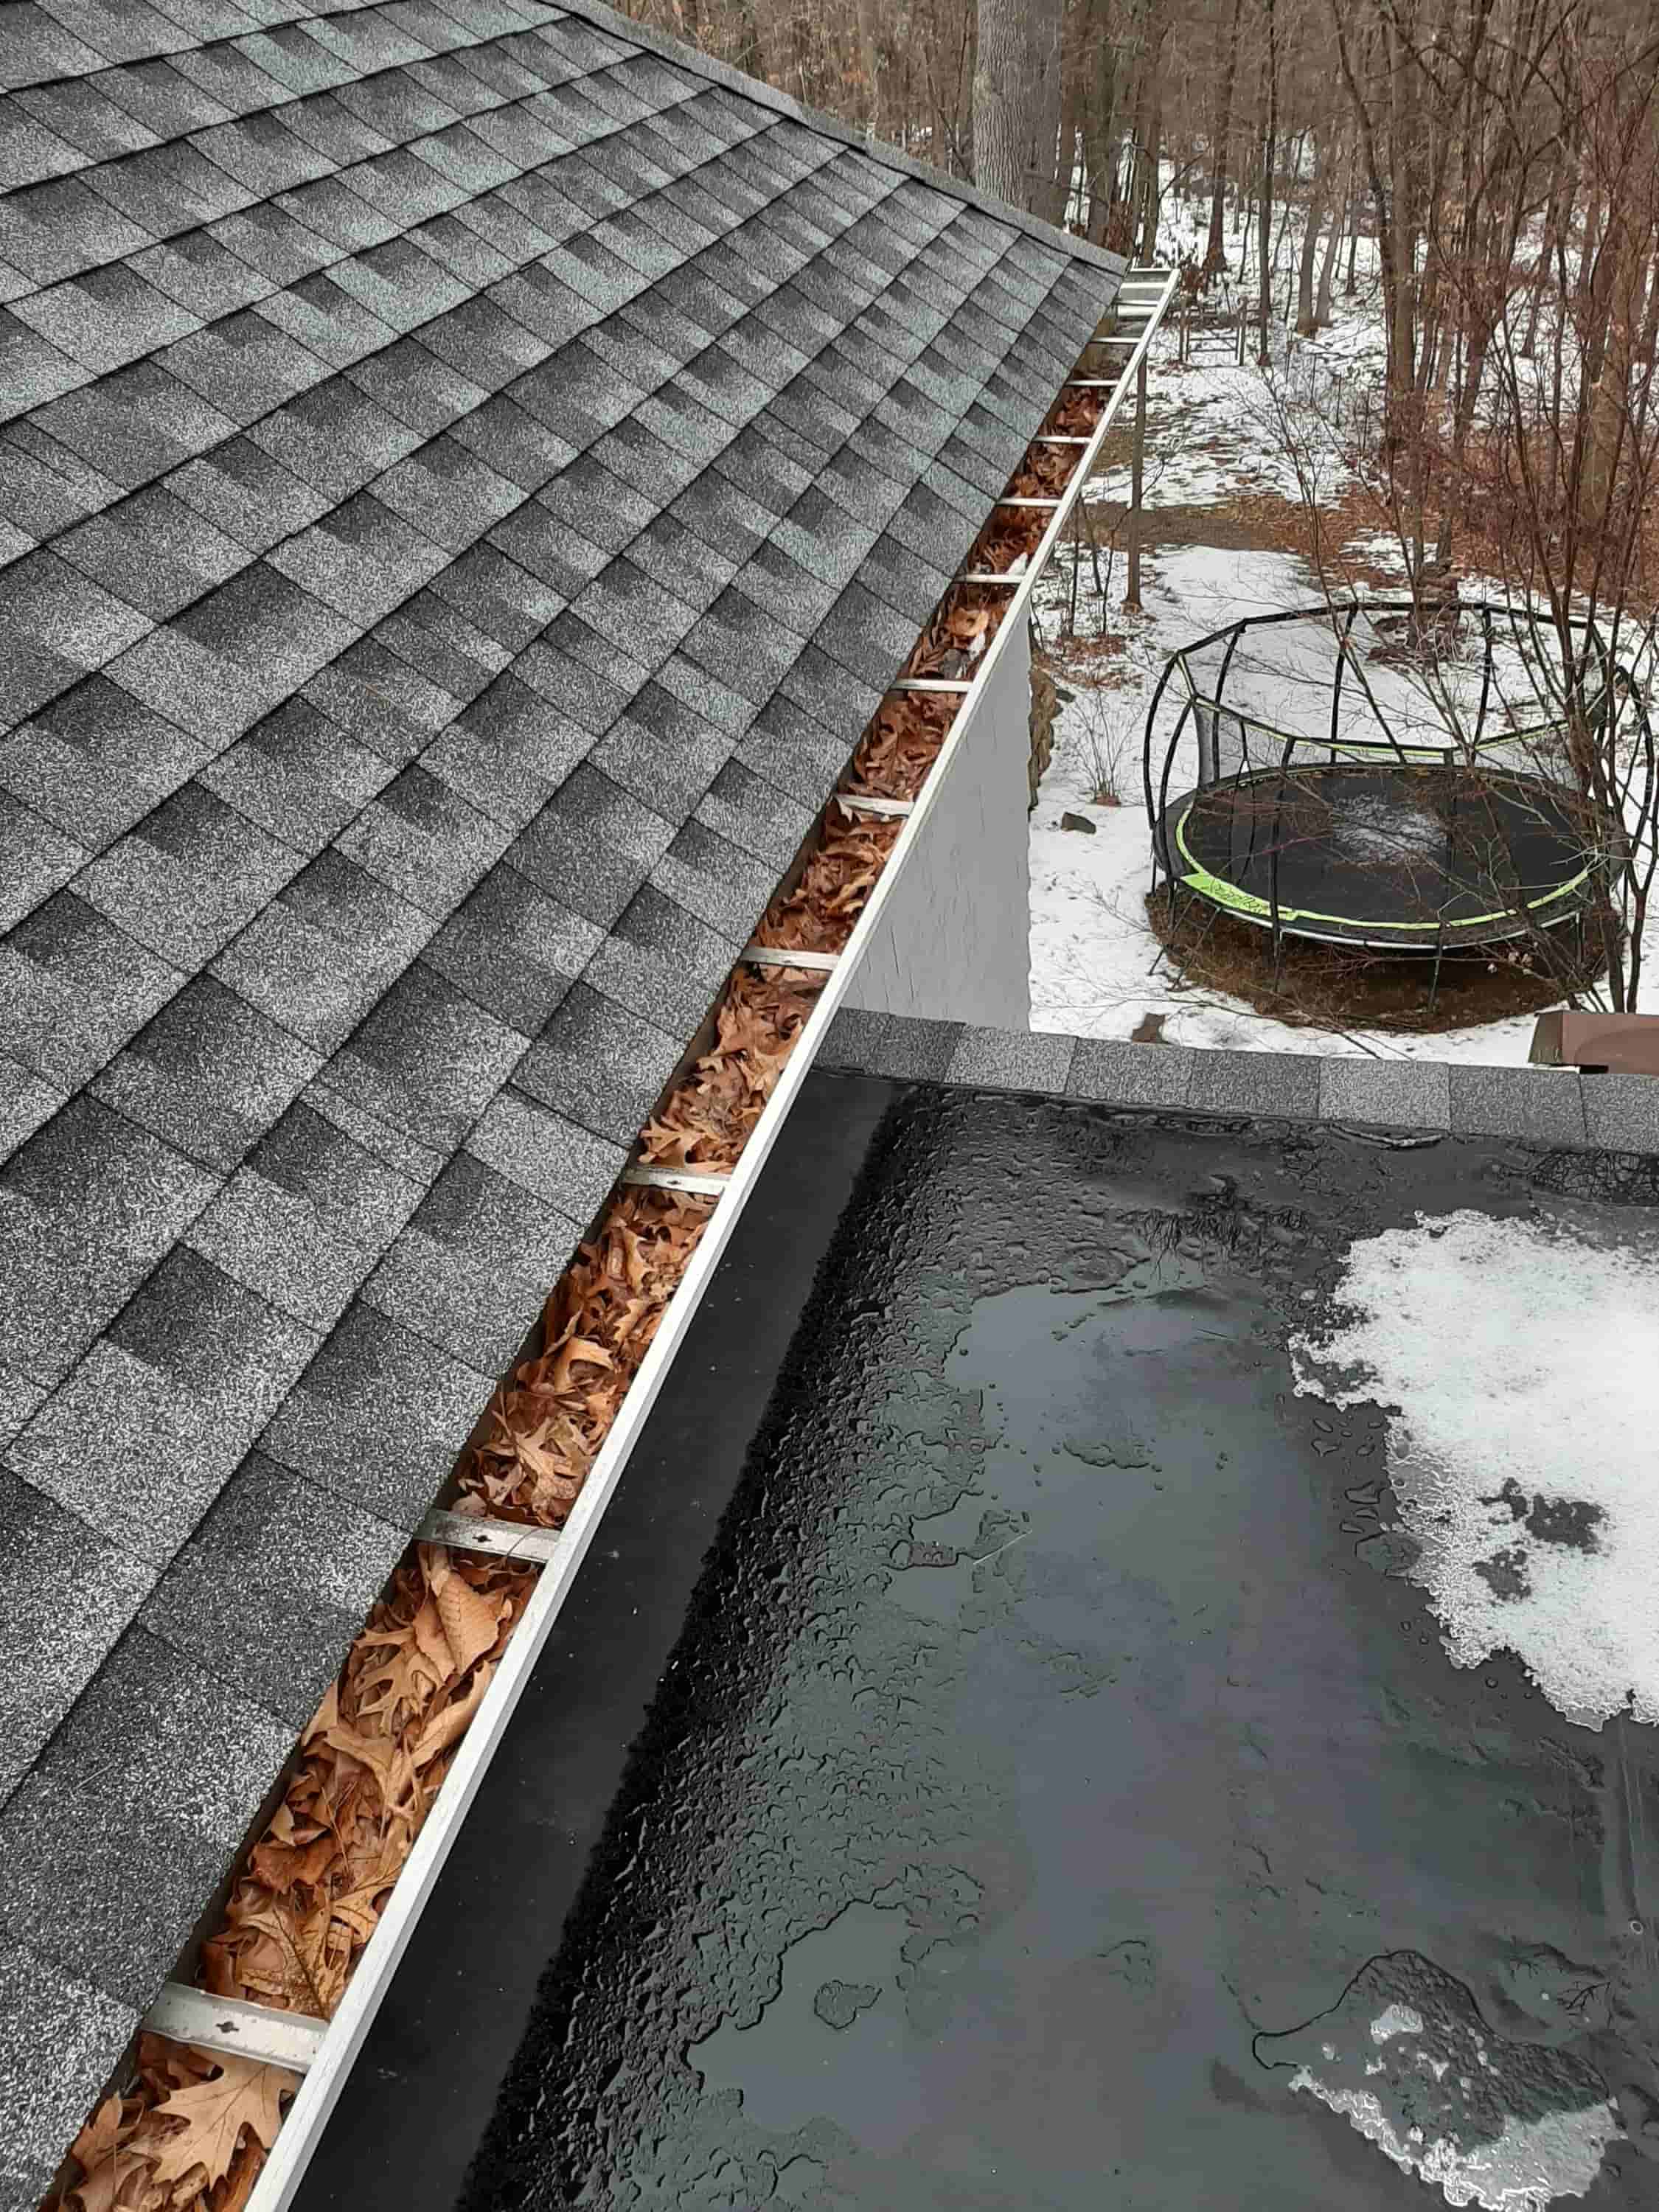 cleaning roof gutters